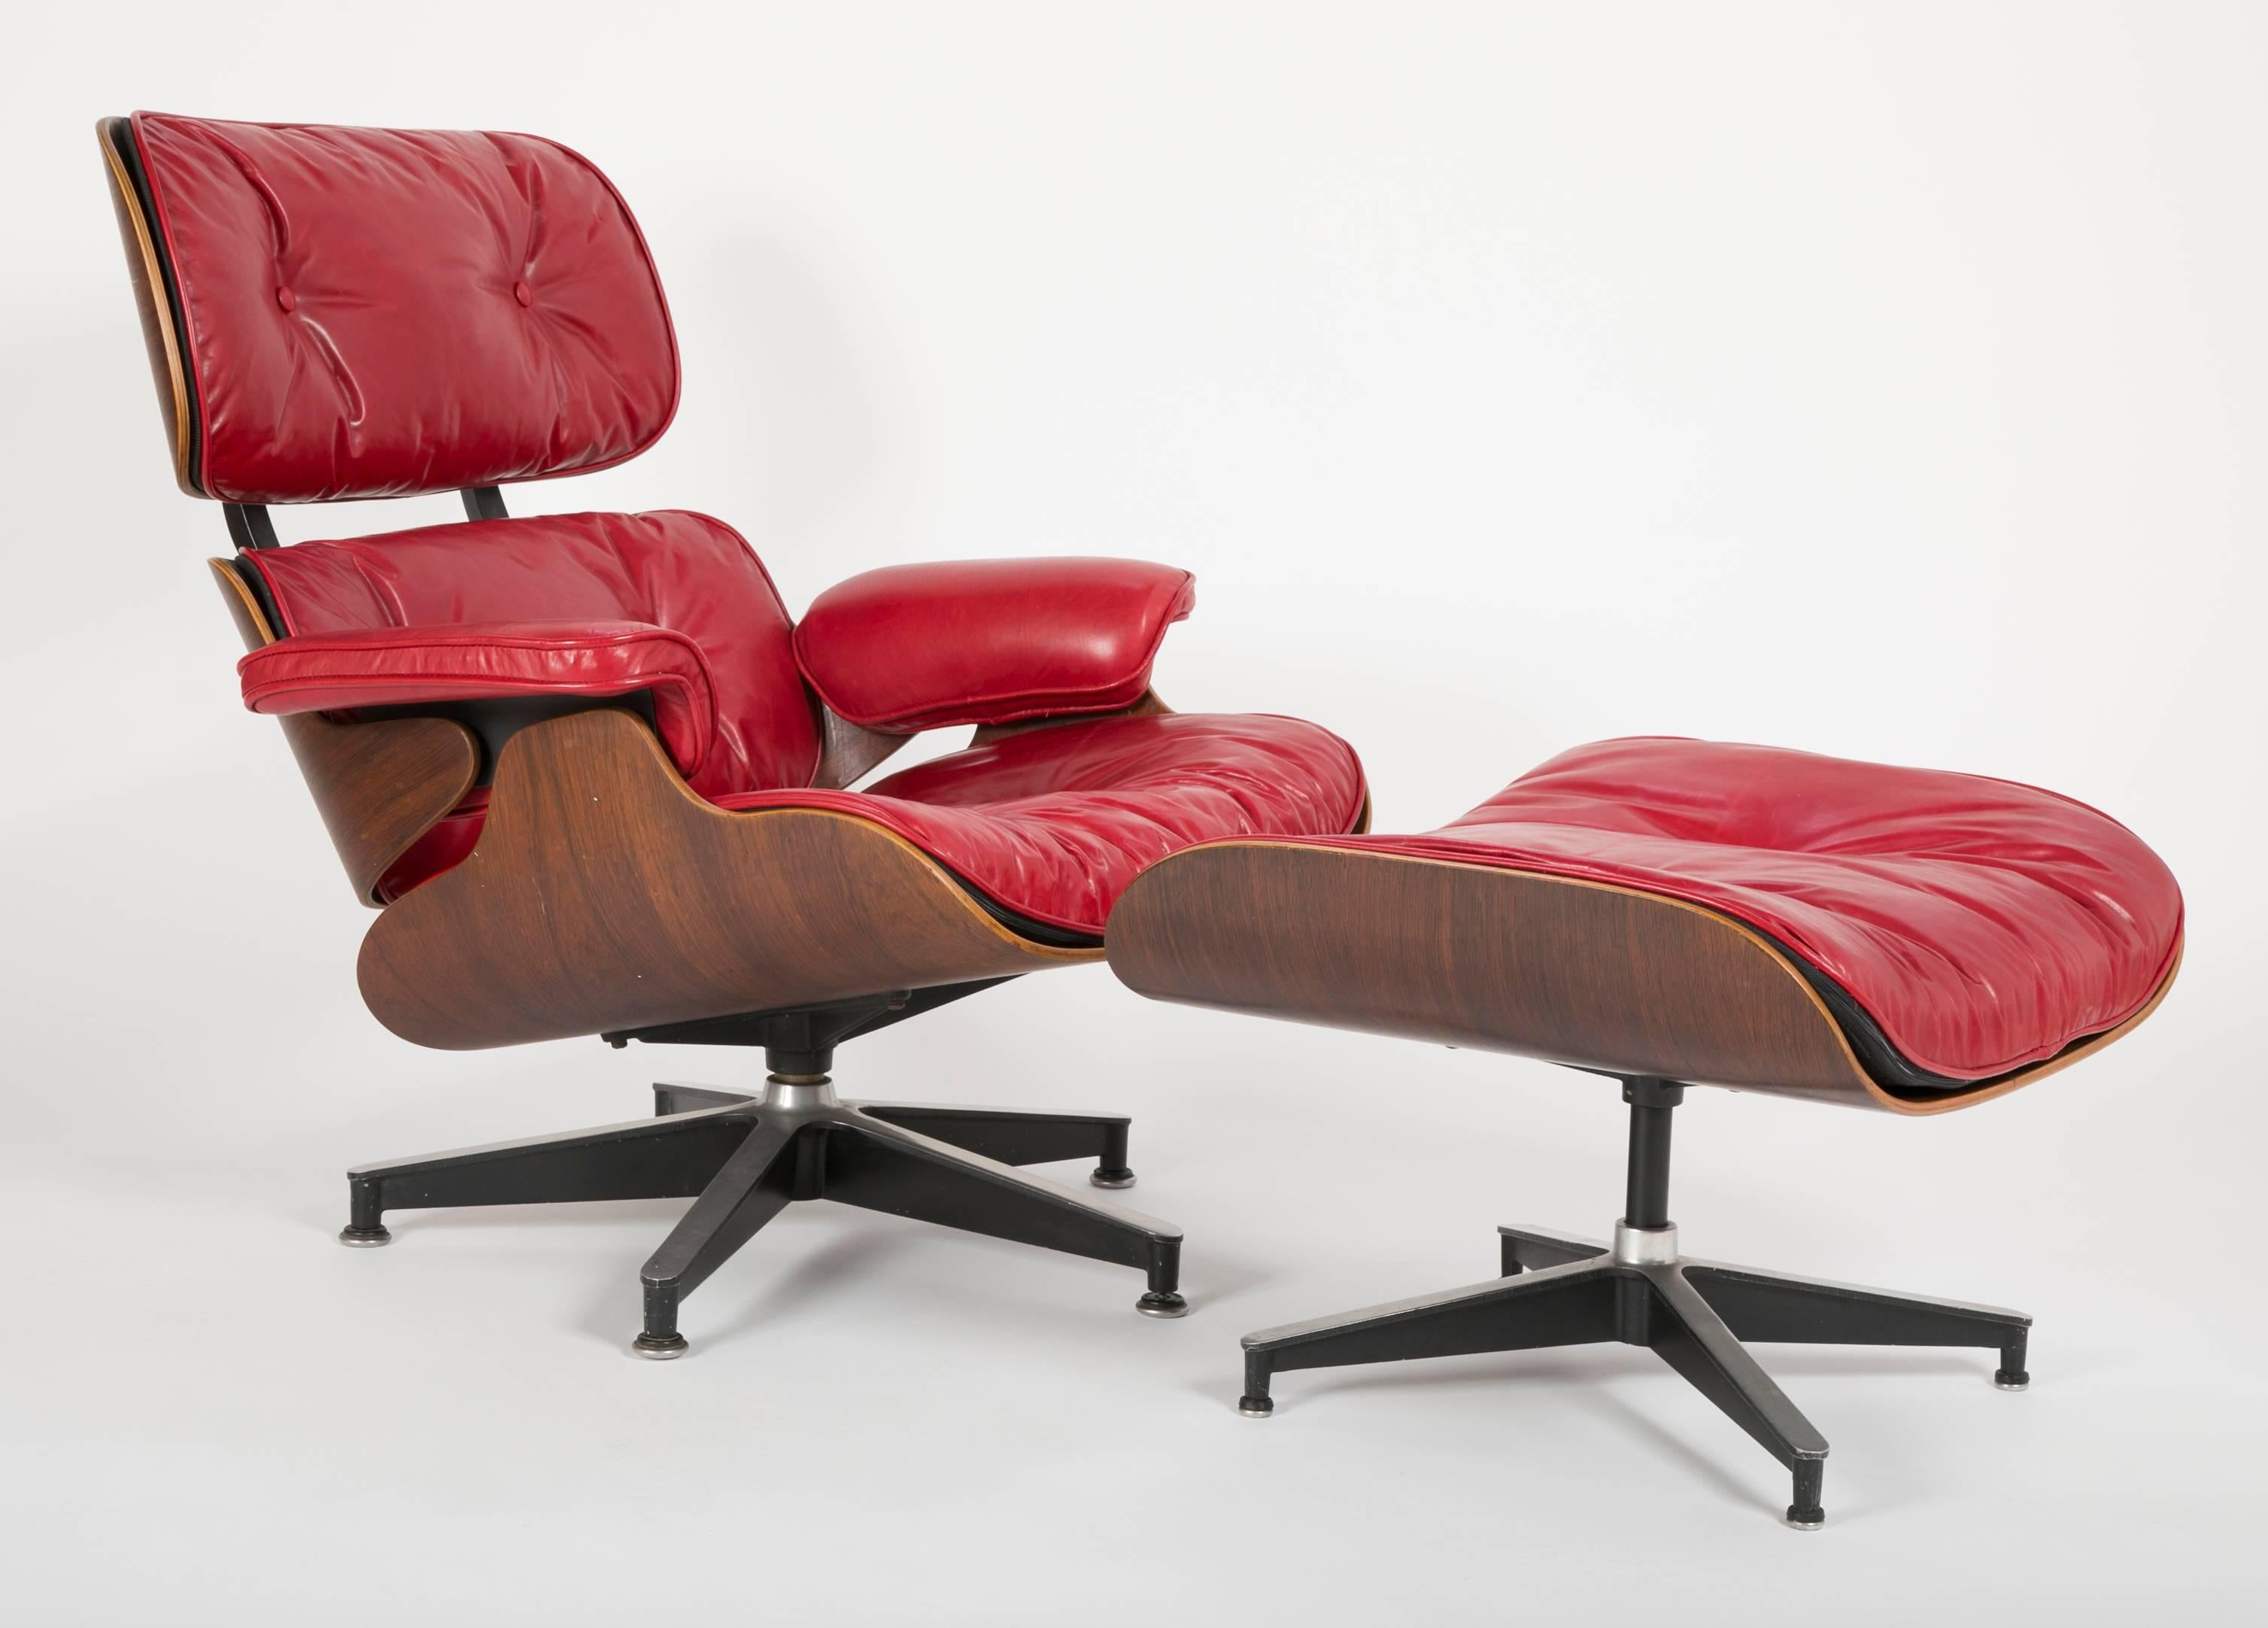 Eames Lounge 670 and Ottoman 671 in rosewood with red leather upholstery.